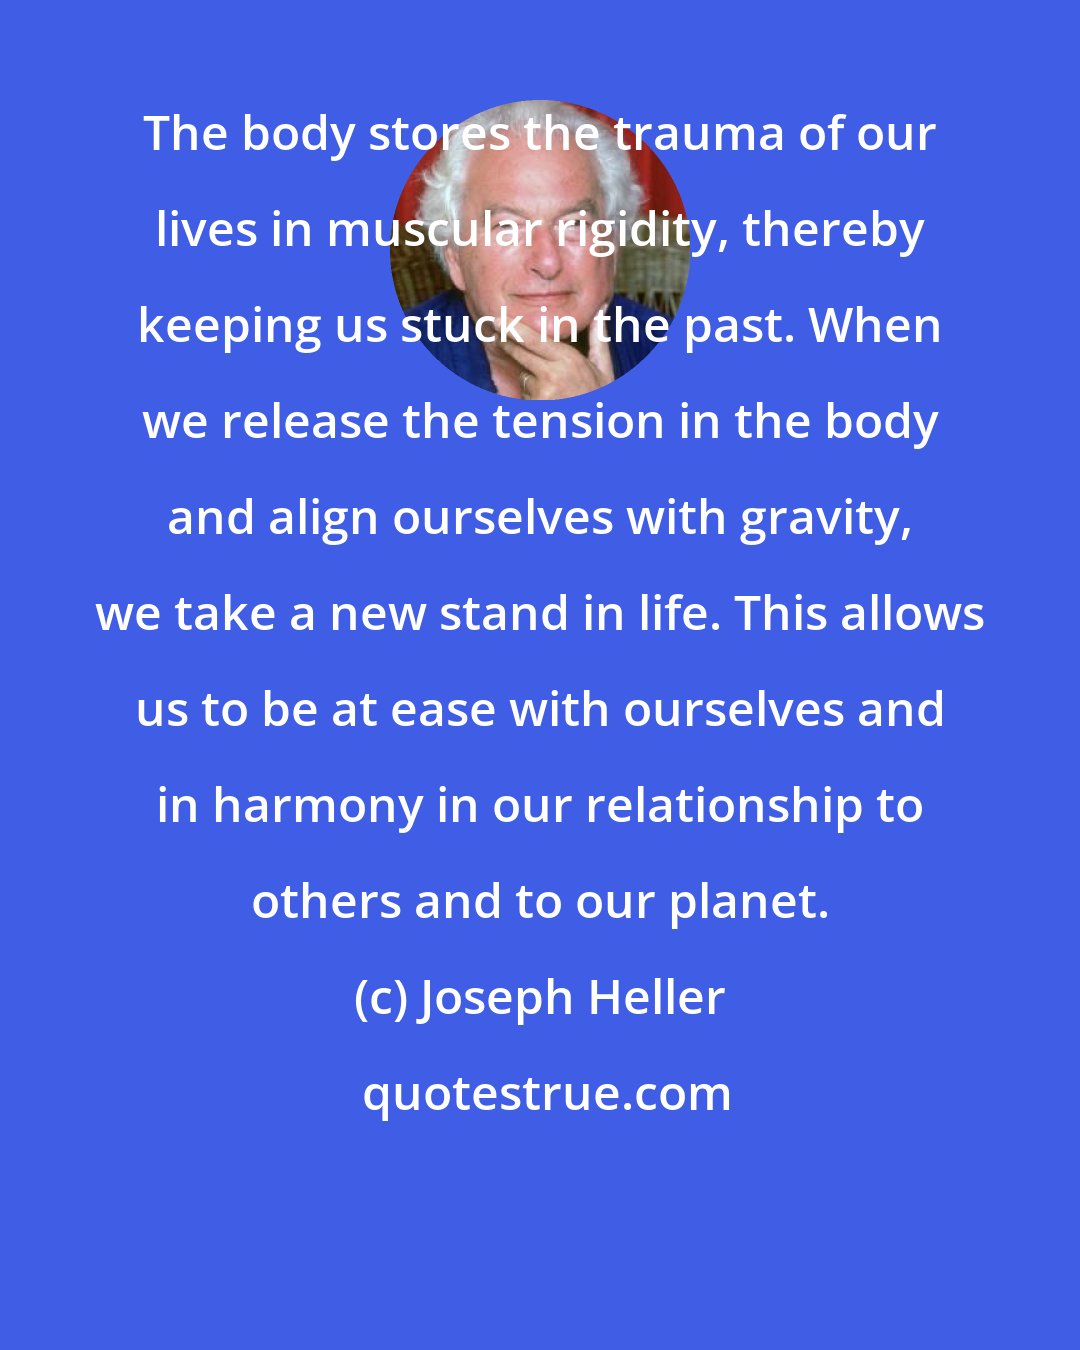 Joseph Heller: The body stores the trauma of our lives in muscular rigidity, thereby keeping us stuck in the past. When we release the tension in the body and align ourselves with gravity, we take a new stand in life. This allows us to be at ease with ourselves and in harmony in our relationship to others and to our planet.